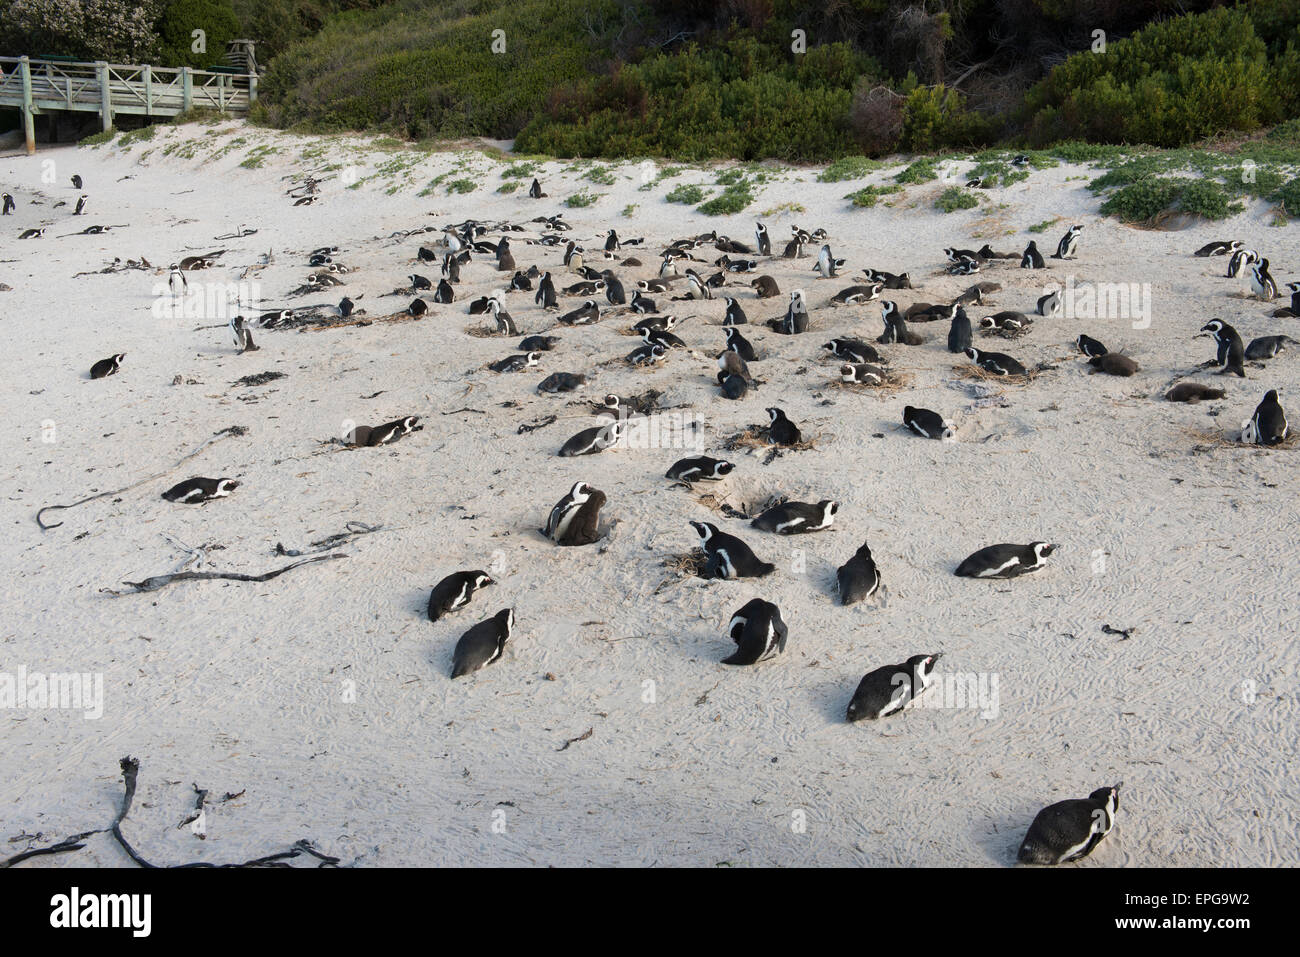 South Africa, Cape Town, Simon's Town, Table Mountain National Park, Boulders Beach. Colony of endangered African Penguins (Wild Stock Photo